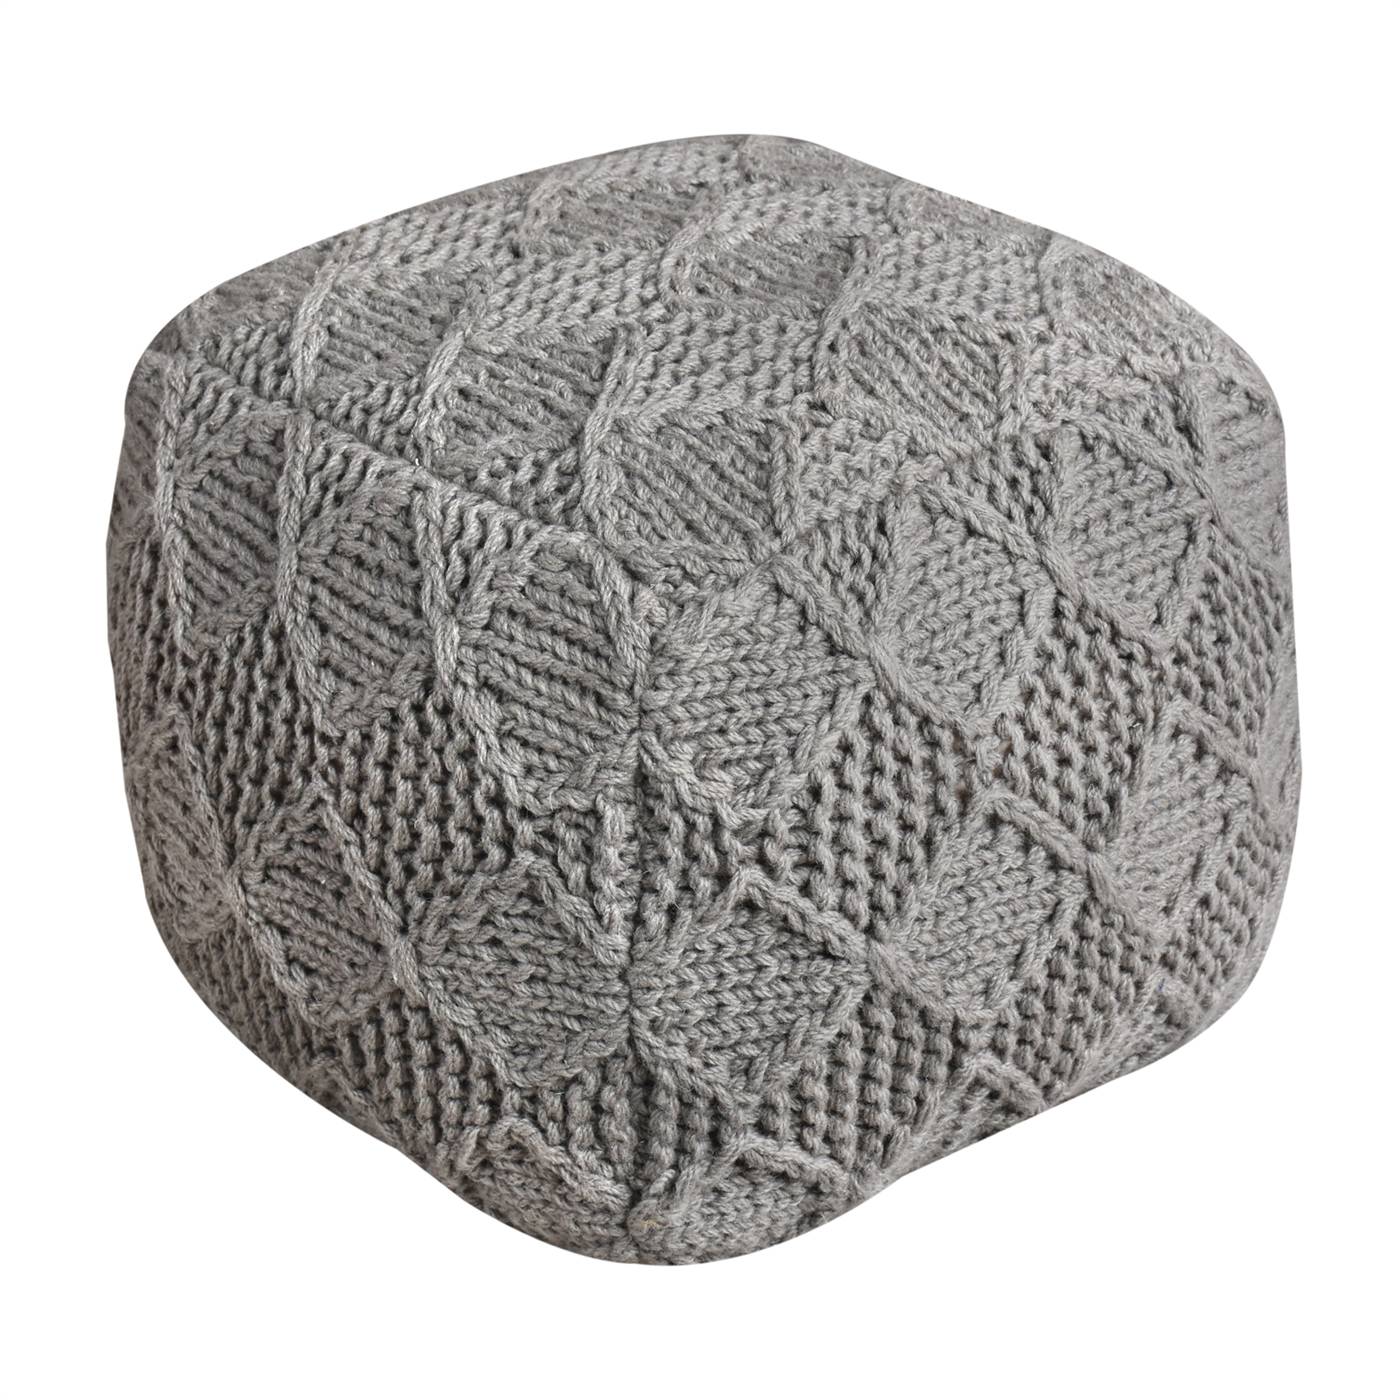 Kinzie Pouf, 40x40x40 cm, Grey, NZ Wool, Hand Knitted, Hm Knitted, Flat Weave